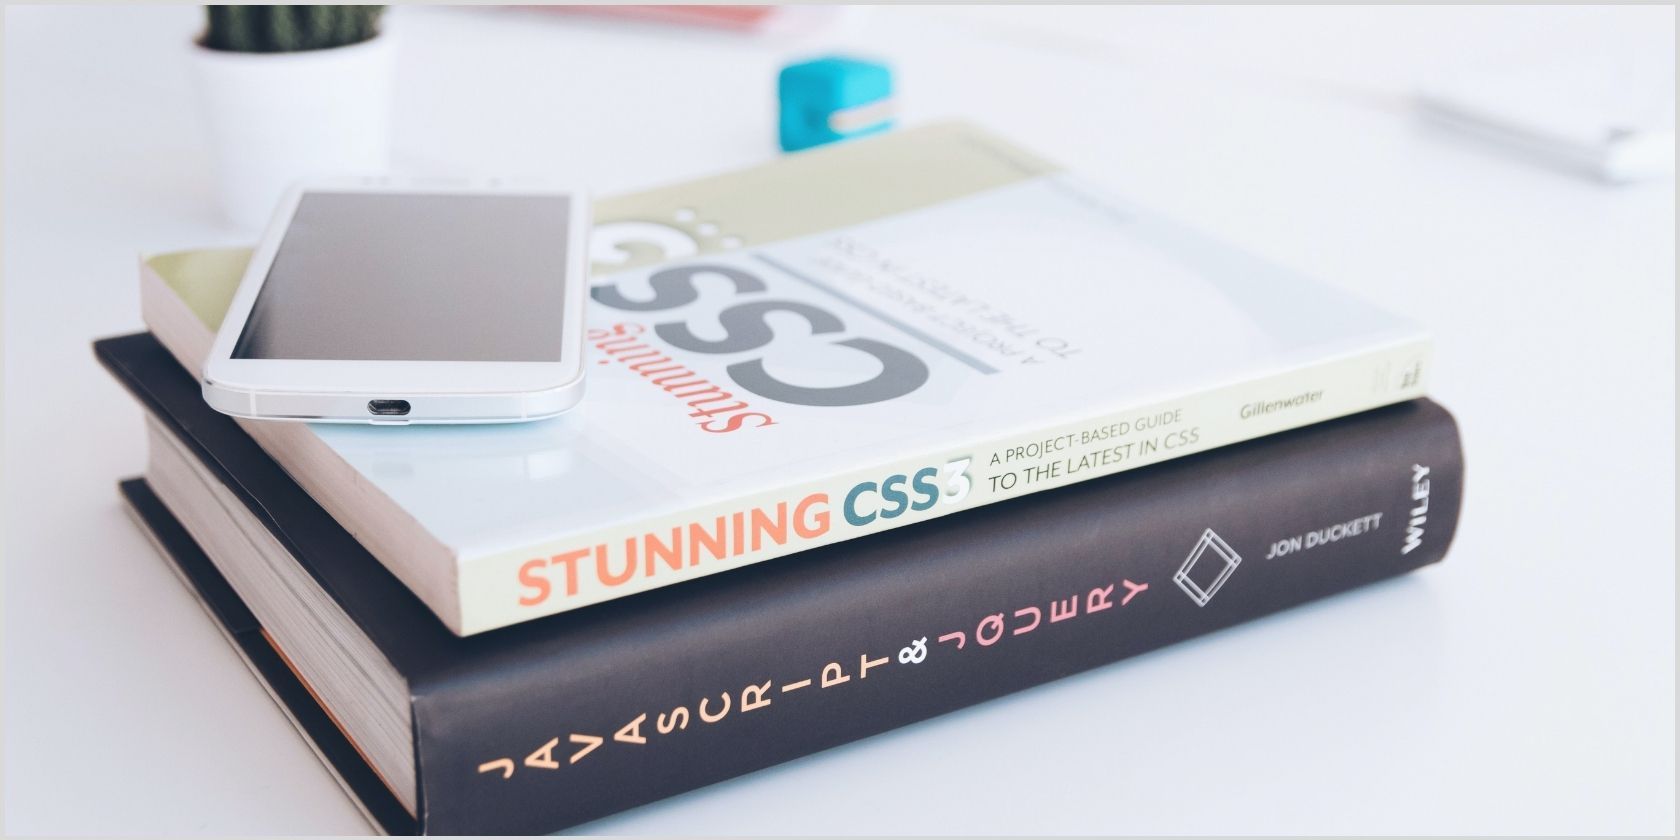 A book titled “Stunning CSS” lies on top of a book on JavaScript. A mobile phone lies on top of both.